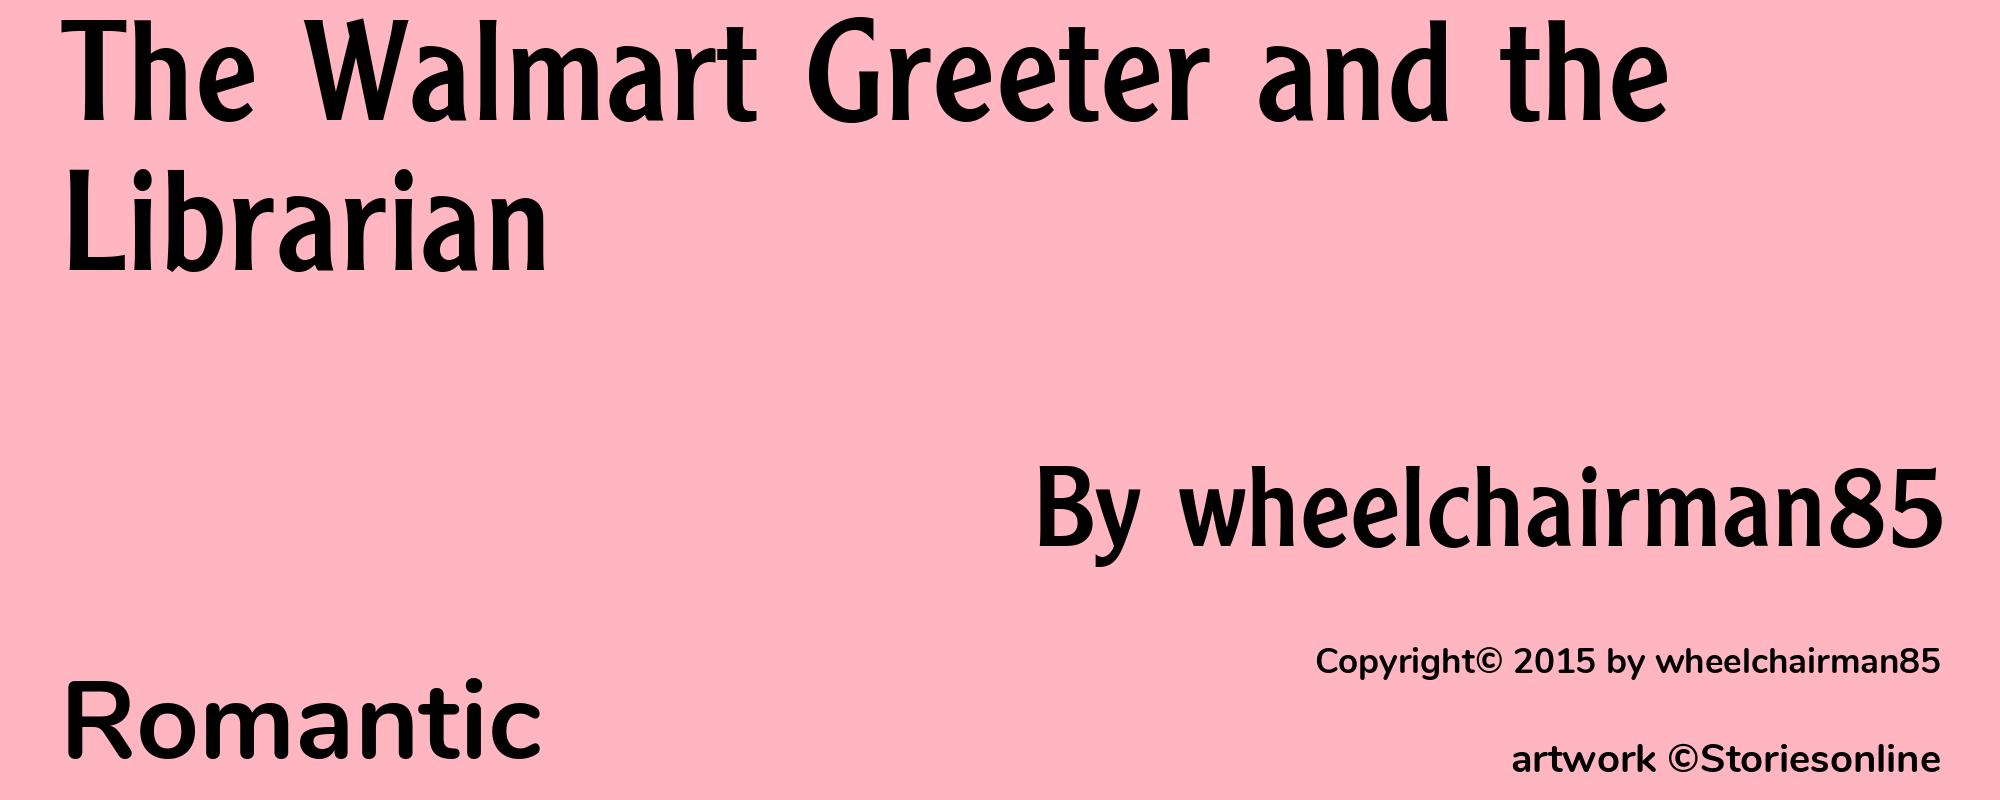 The Walmart Greeter and the Librarian - Cover